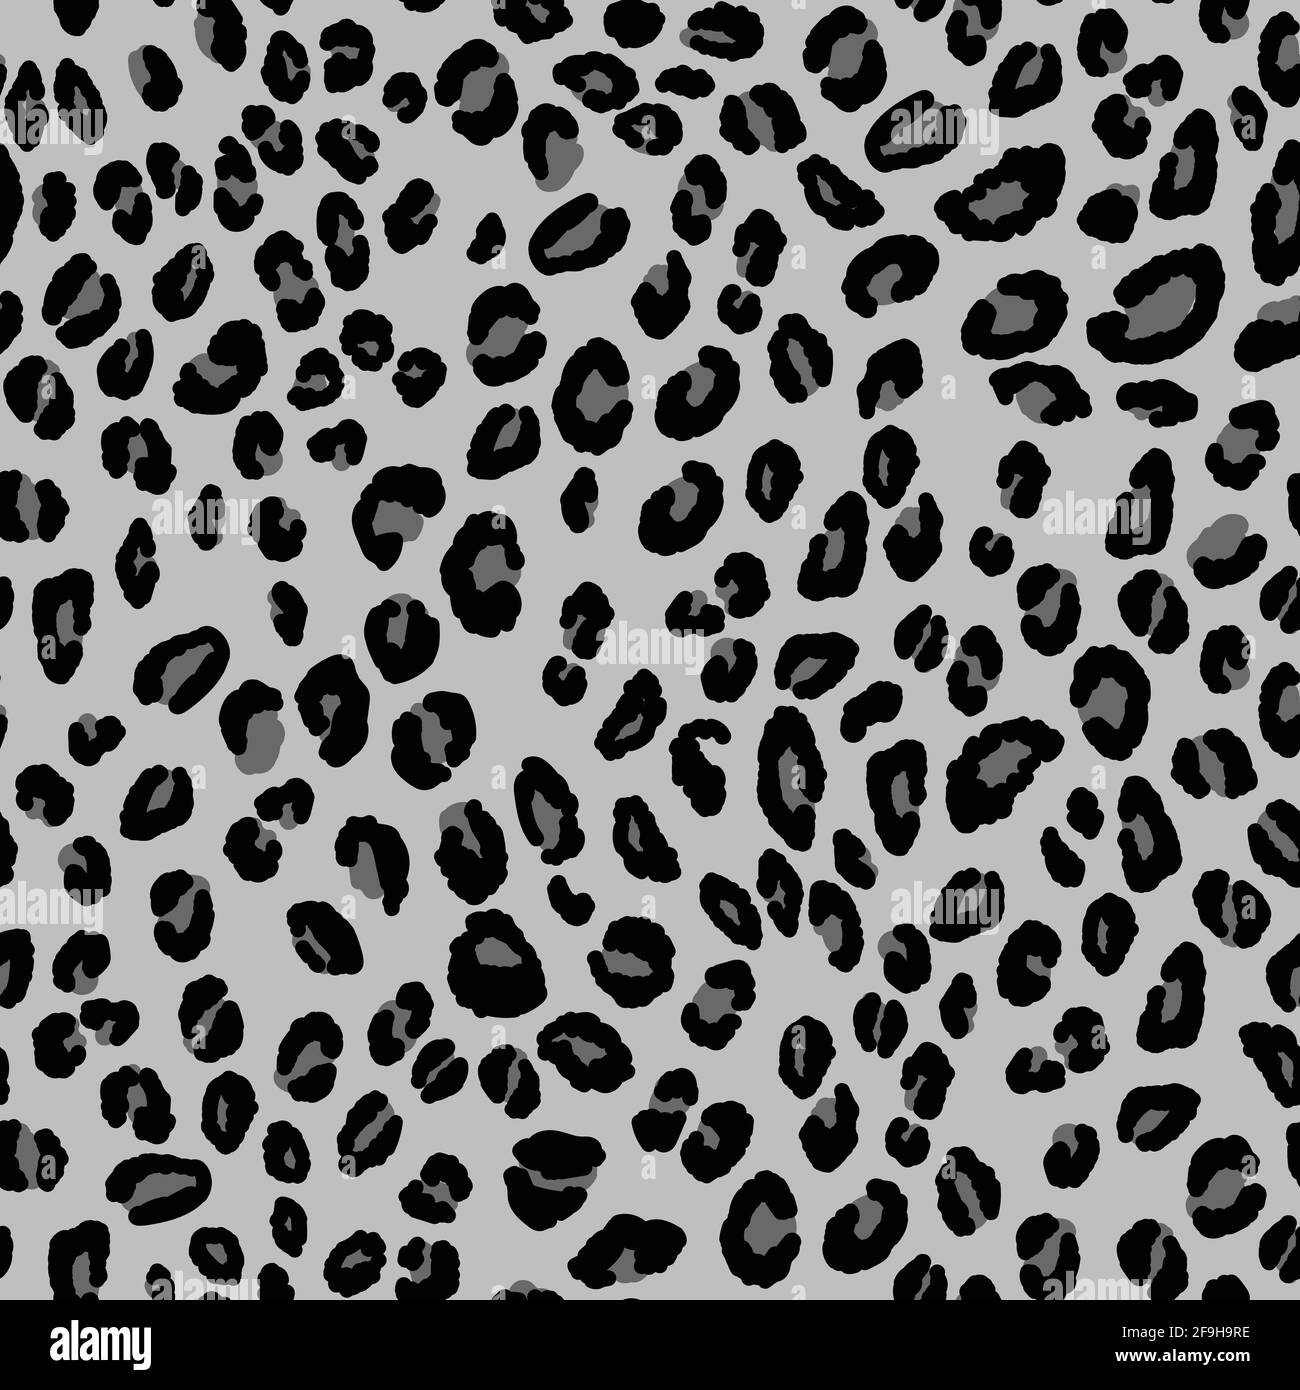 Gray and black leopard fashion seamless pattern Vector Image